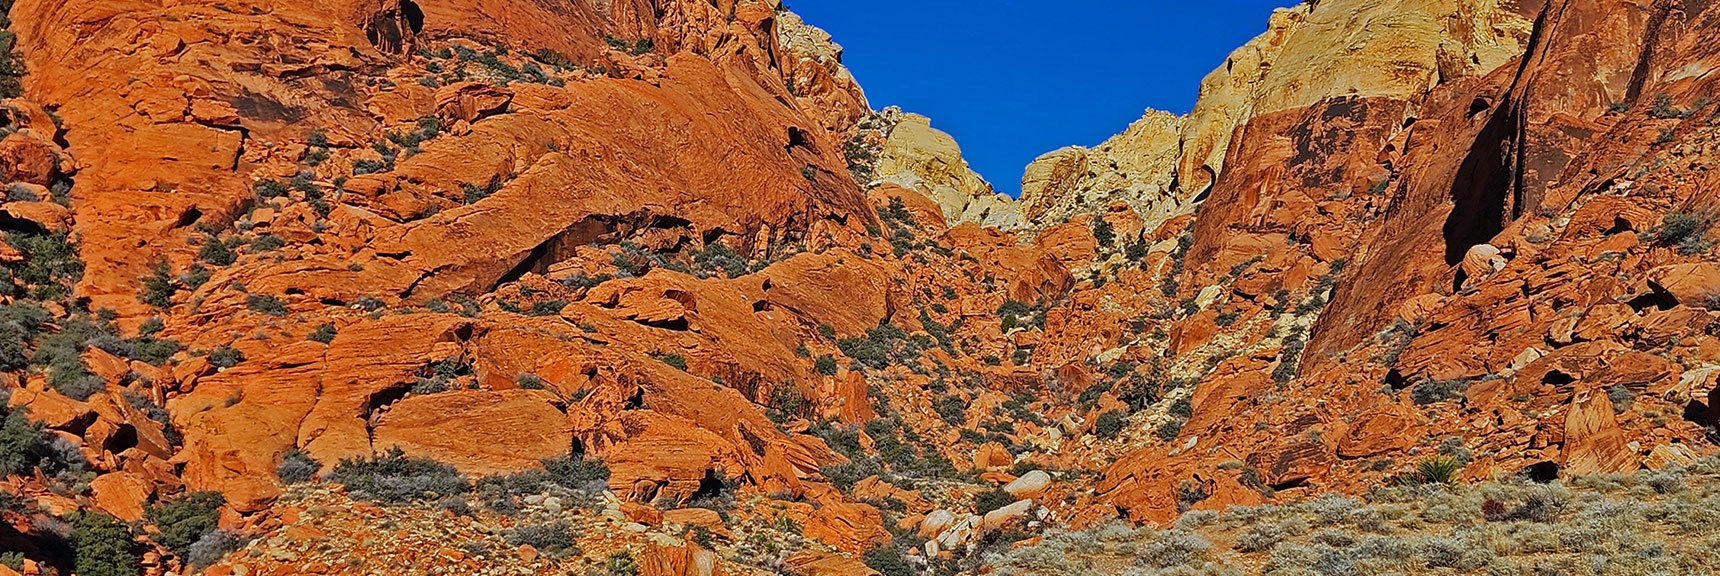 As Boulders Get Larger, Navigate Up to the Canyon's East (Left) Ridge. | Upper Calico Hills Loop | Calico Basin and Red Rock Canyon, Nevada